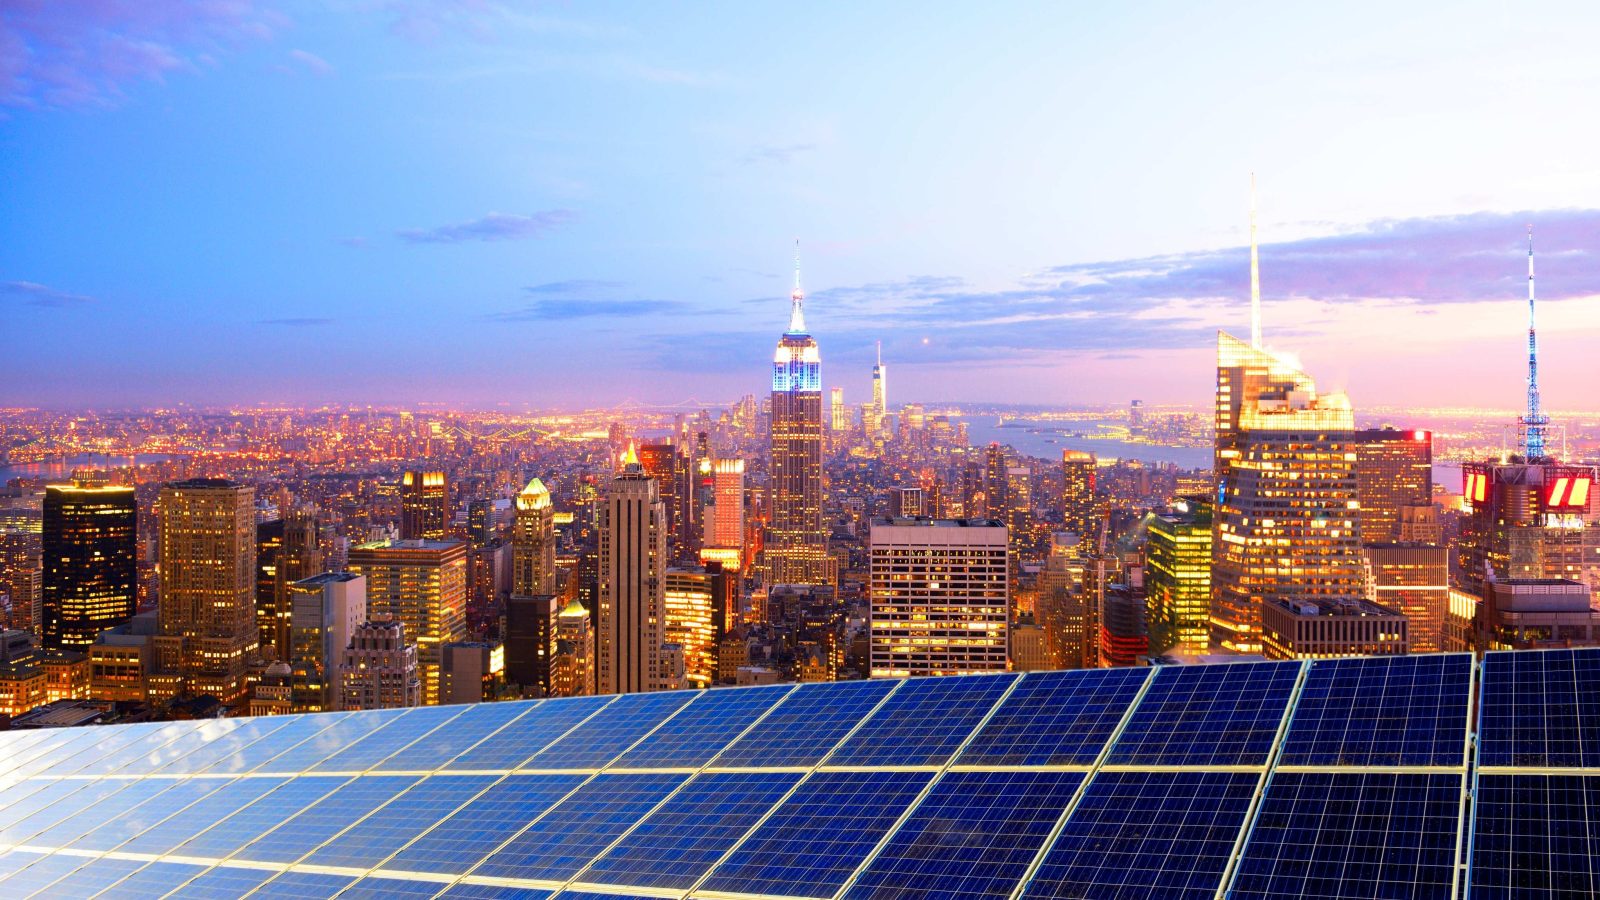 NYC wants more rooftop solar. Its fire code is getting in the way.